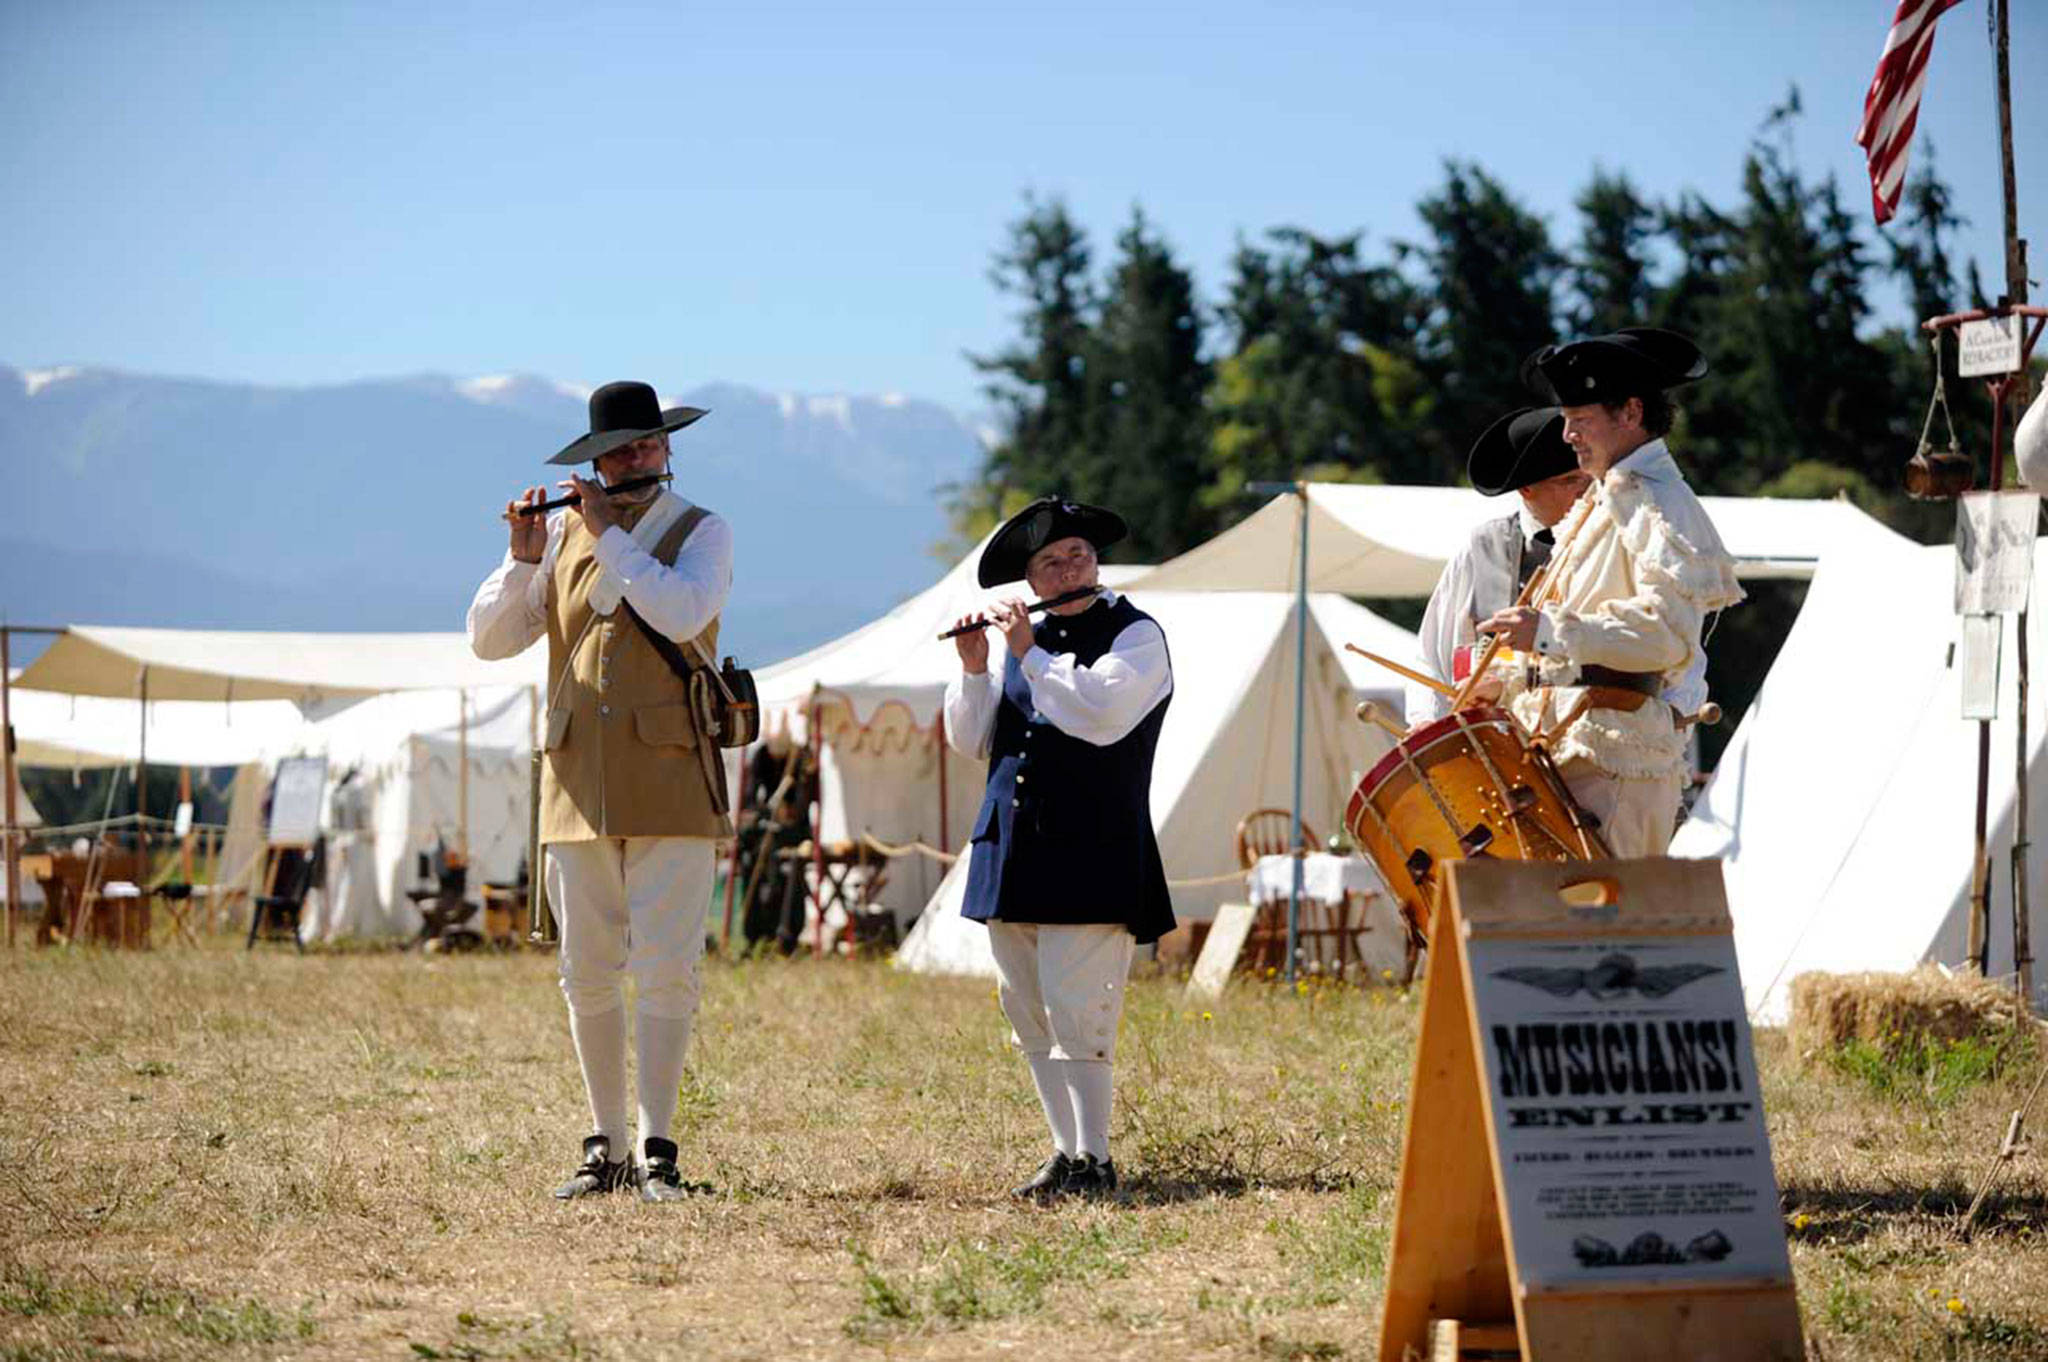 The encampment at the Northwest Colonial Festival, seen here in 2016, yet again features live music and re-enactments of blacksmiths and gunsmiths from 1775. (Matthew Nash/Olympic Peninsula News Group)